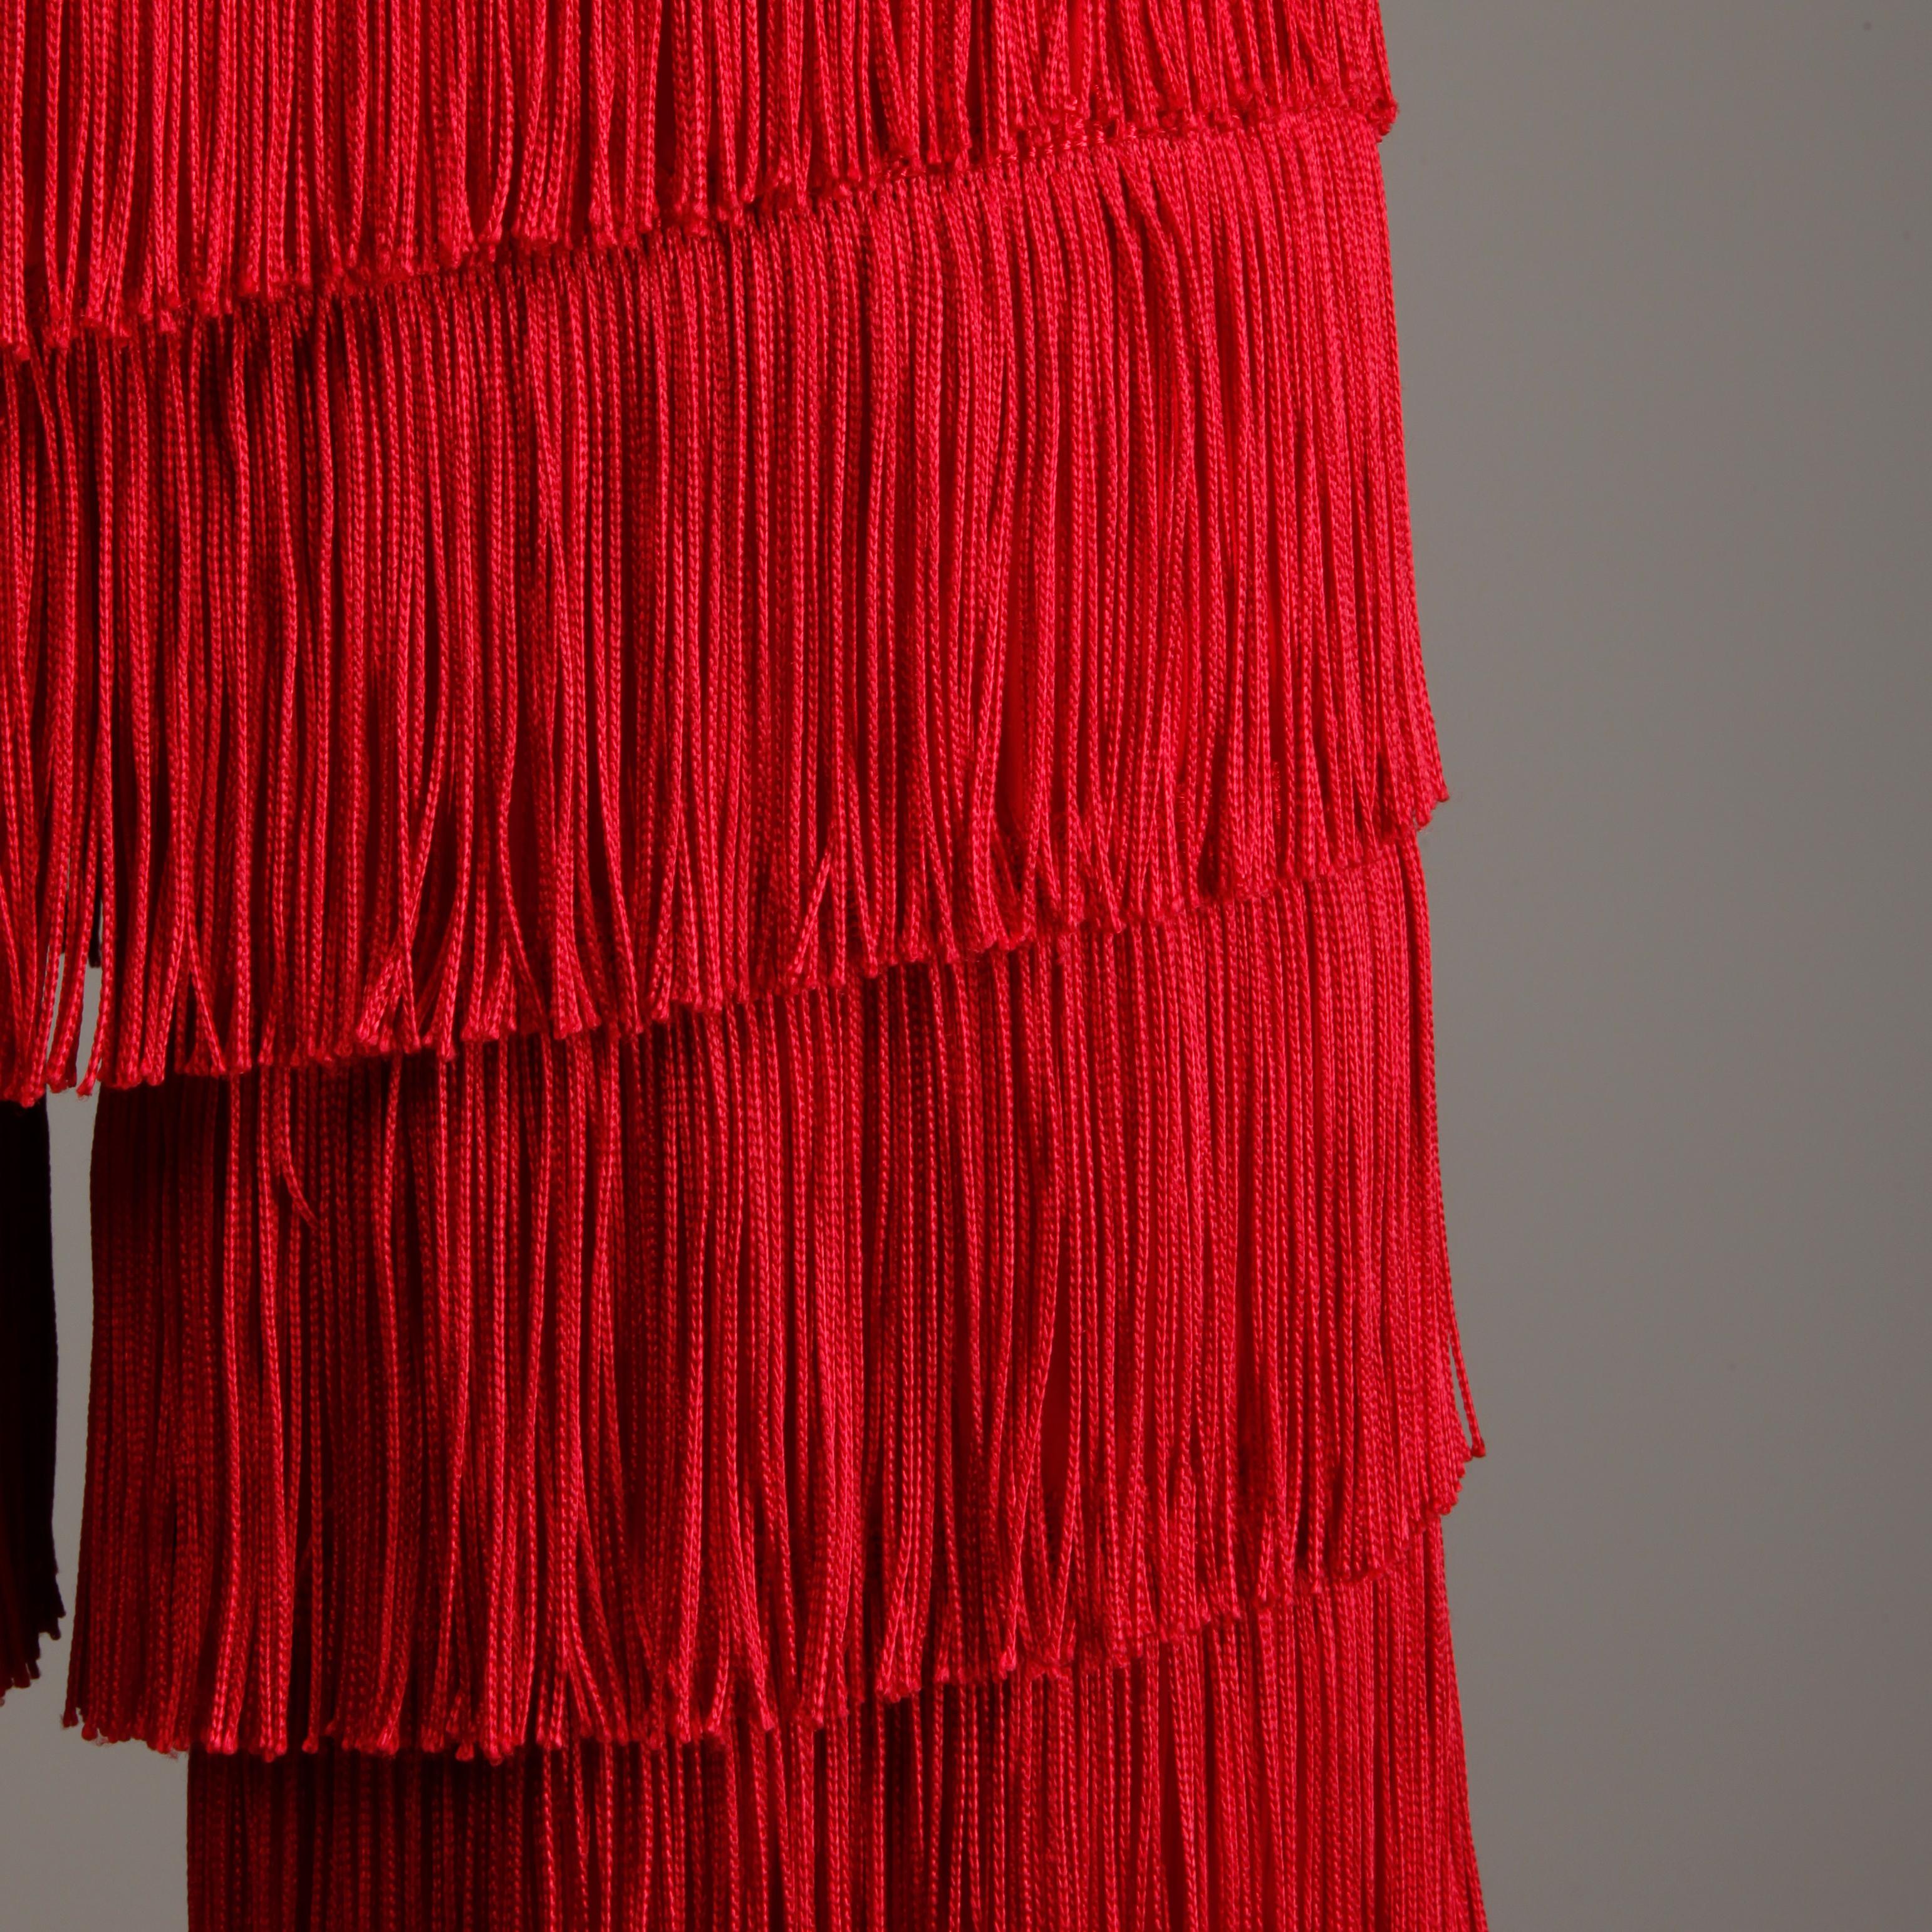 Incredible vintage 1960s bright red tiered fringe pants! A great alternative to a statement skirt. Unlined with rear metal zip and hook closure. Fits like a modern size medium. The waist measures 30